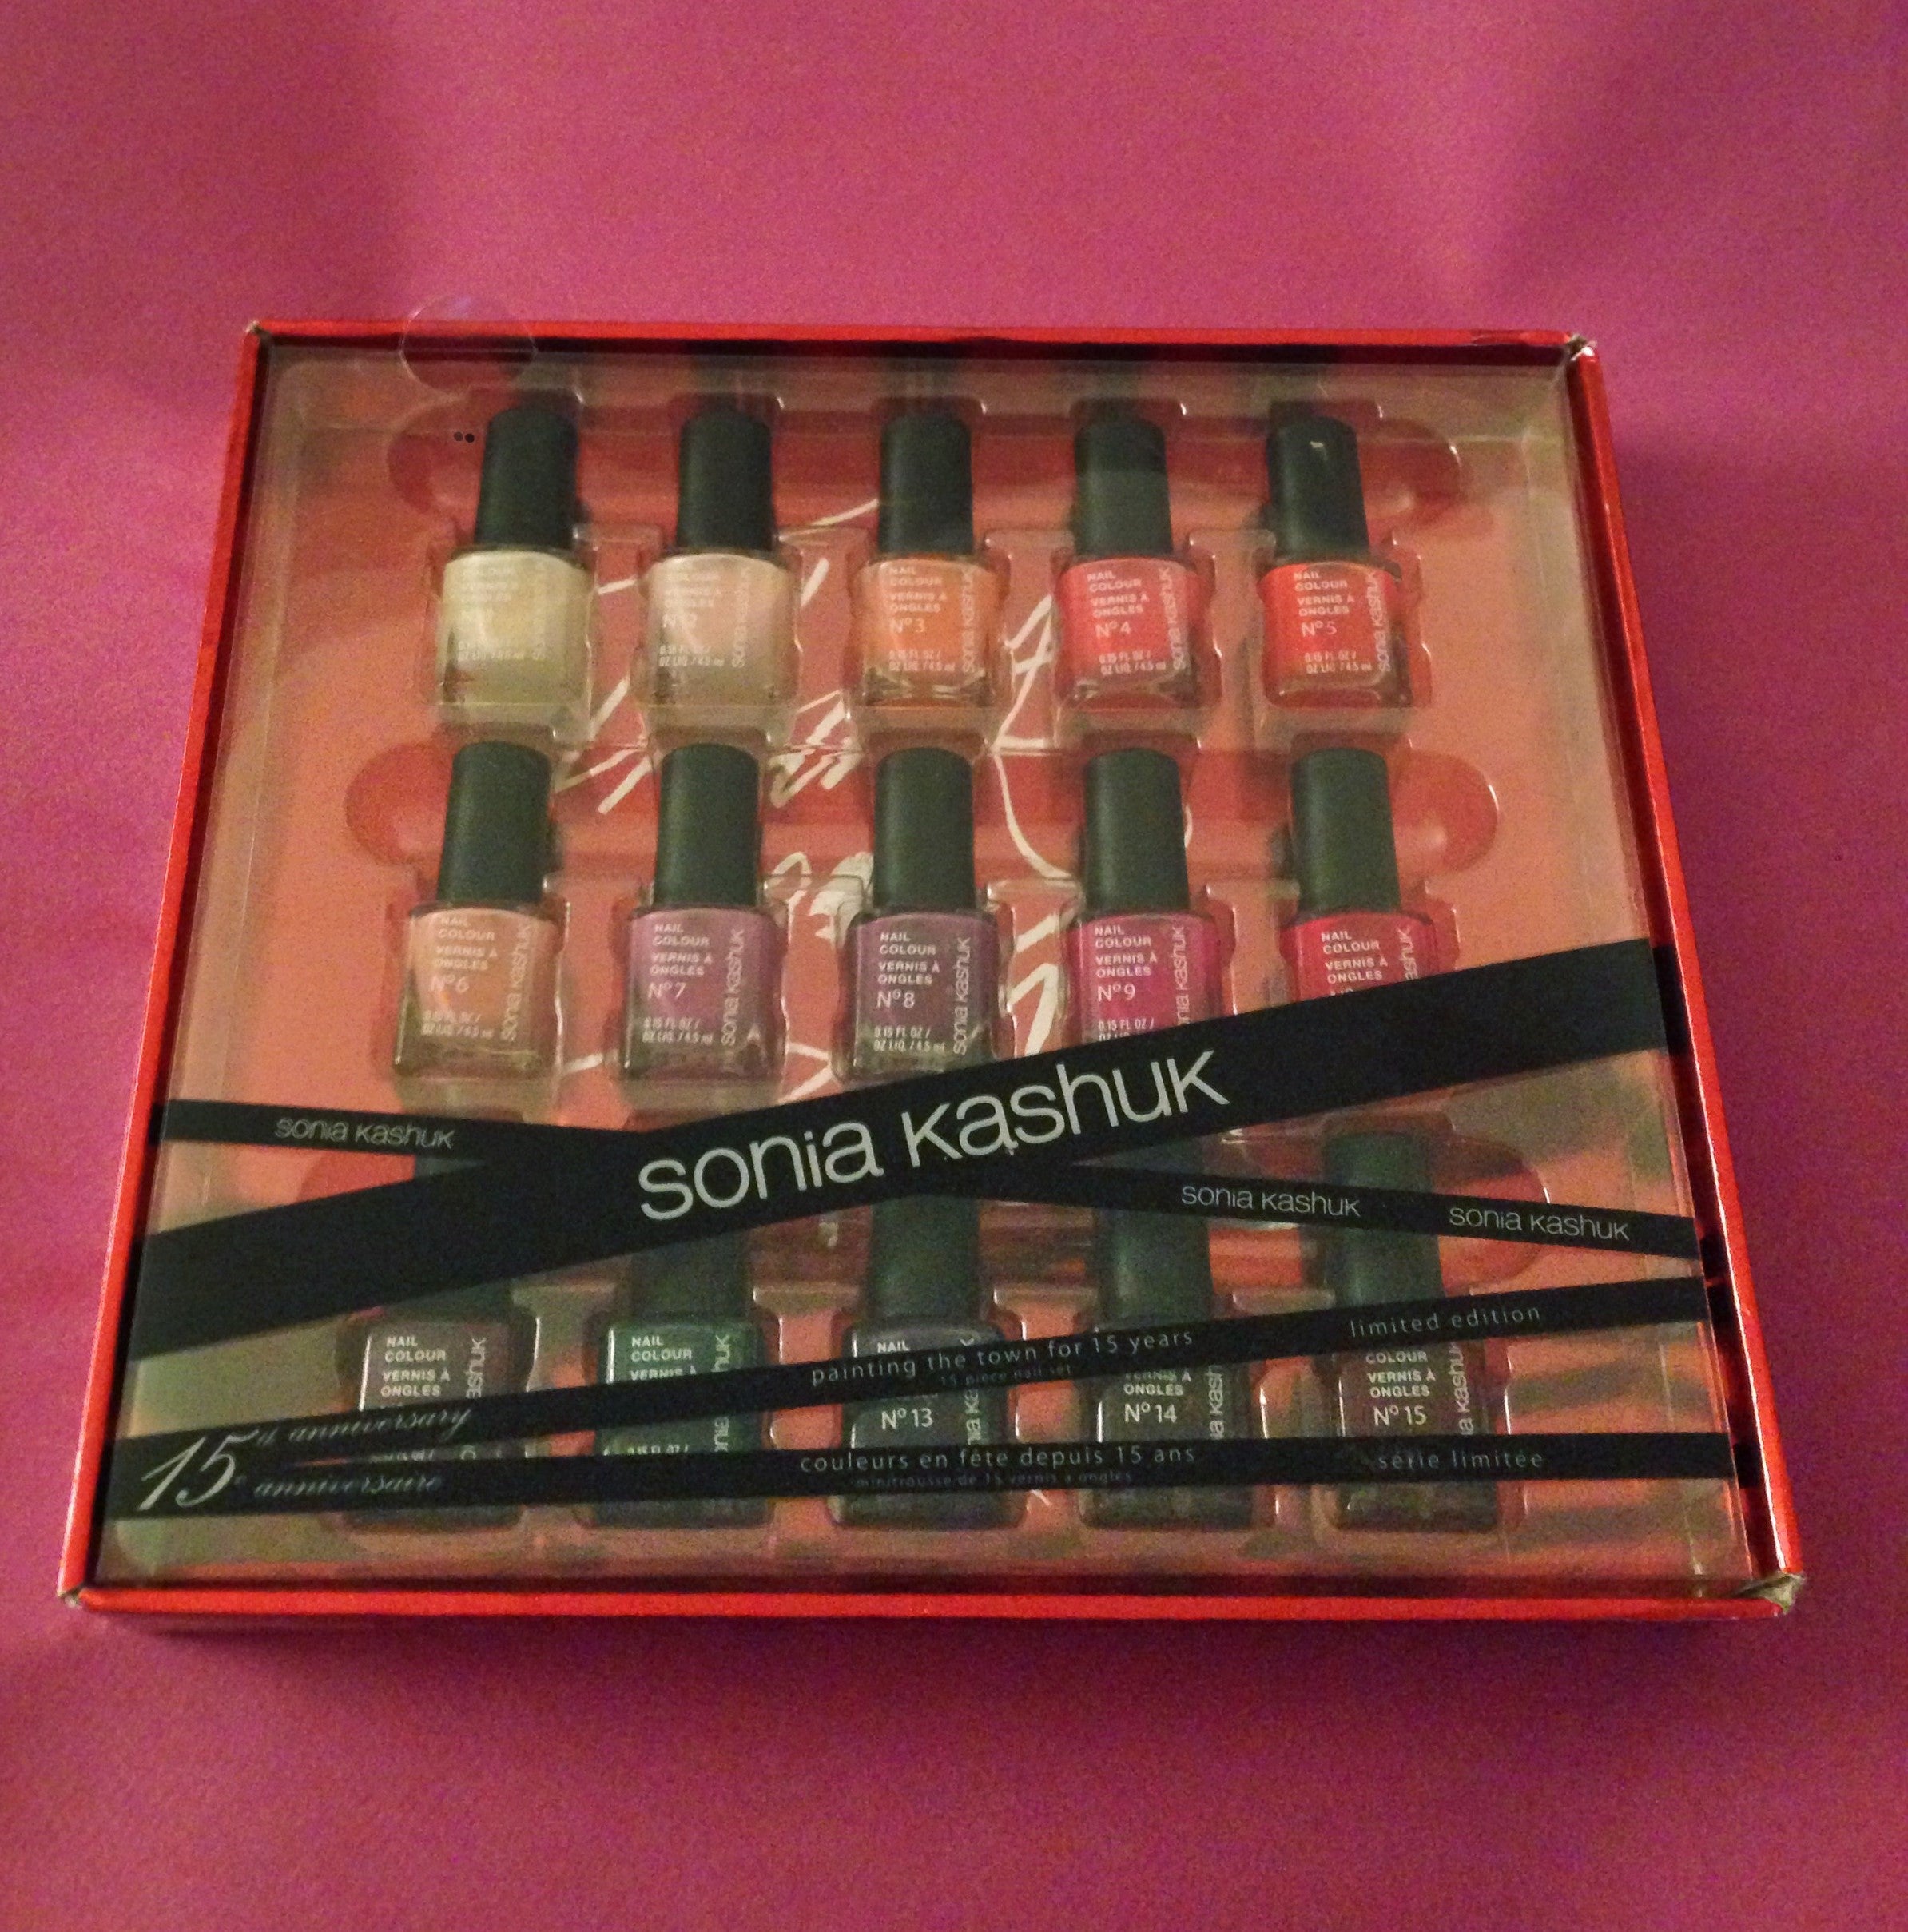 Review, Swatches, Sonia, Kashuk, Fall, 2014, Limited, Edition, 15, Years, Anniversary, Collection, Chic, Defining, Stick, Dramatically, Intensifying, Kajal, Powerful, Pout, Lip, Palette